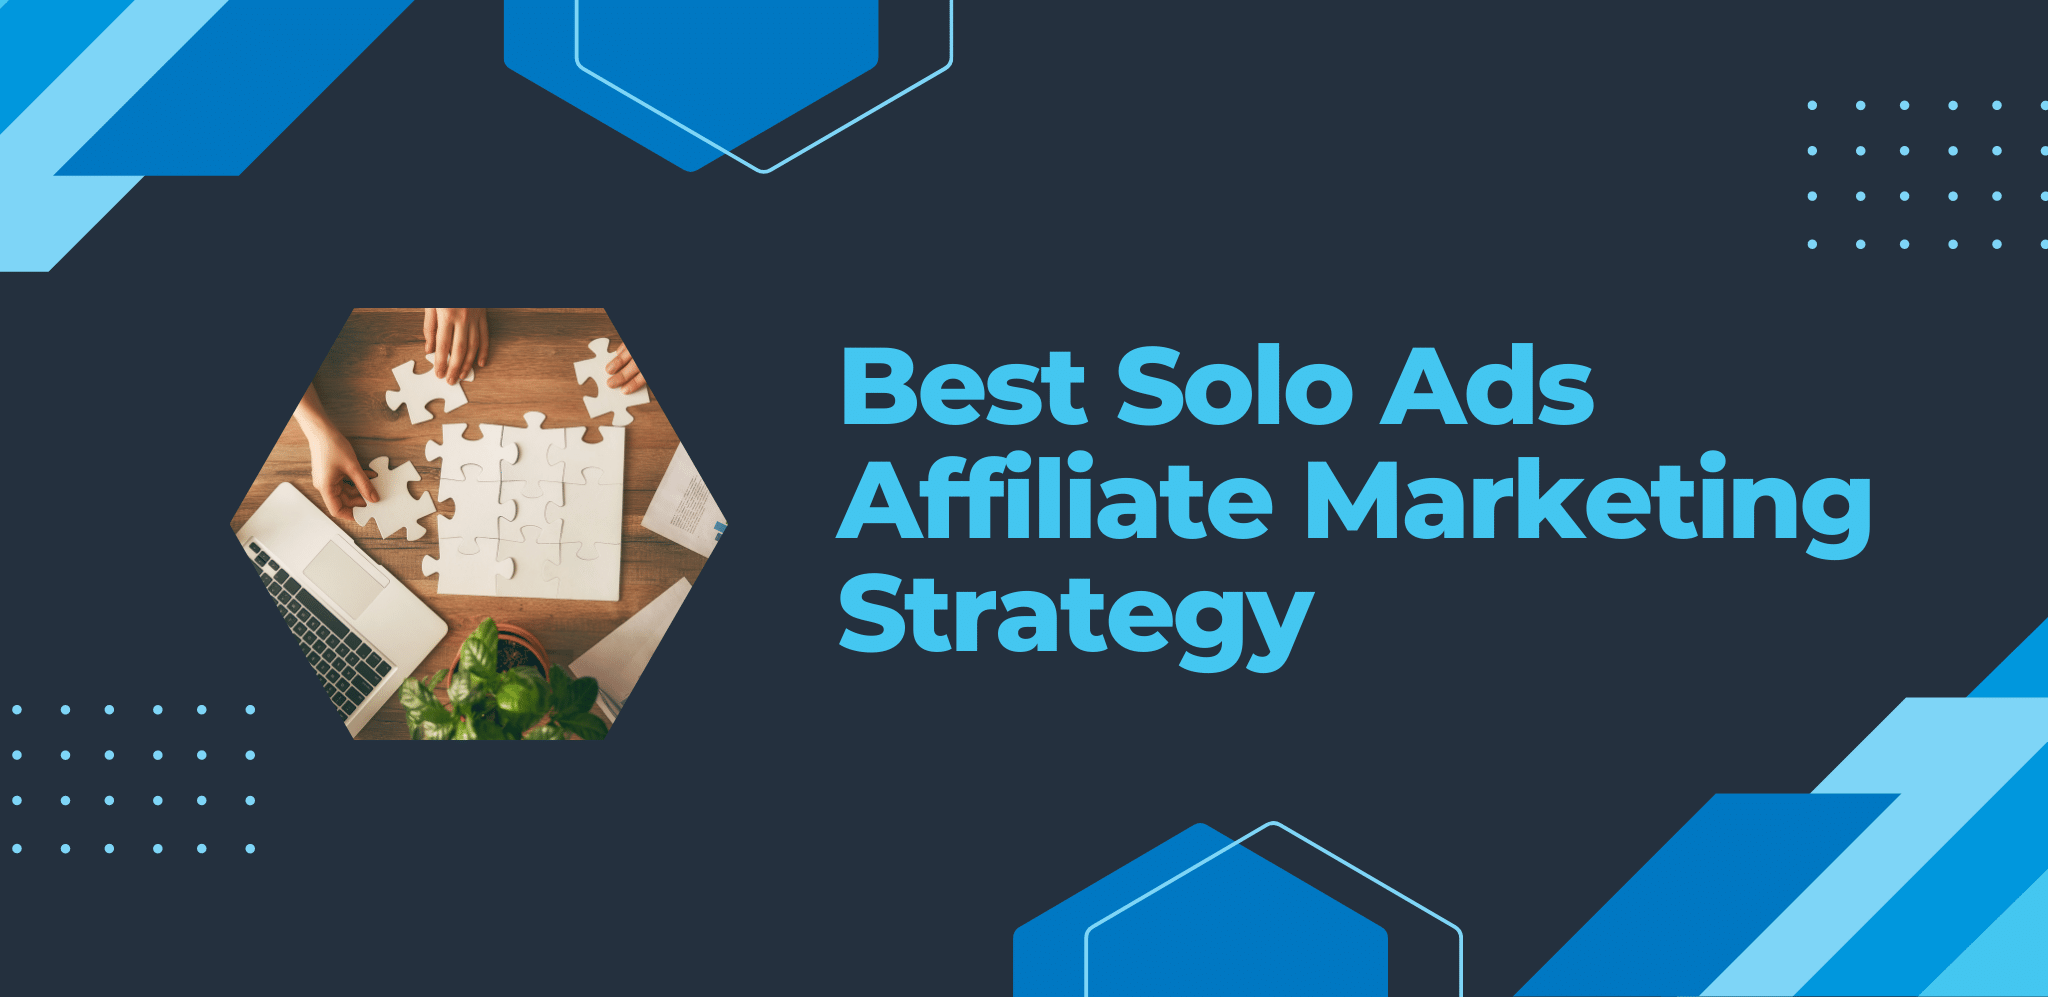 Best Solo Ads Affiliate Marketing Strategy